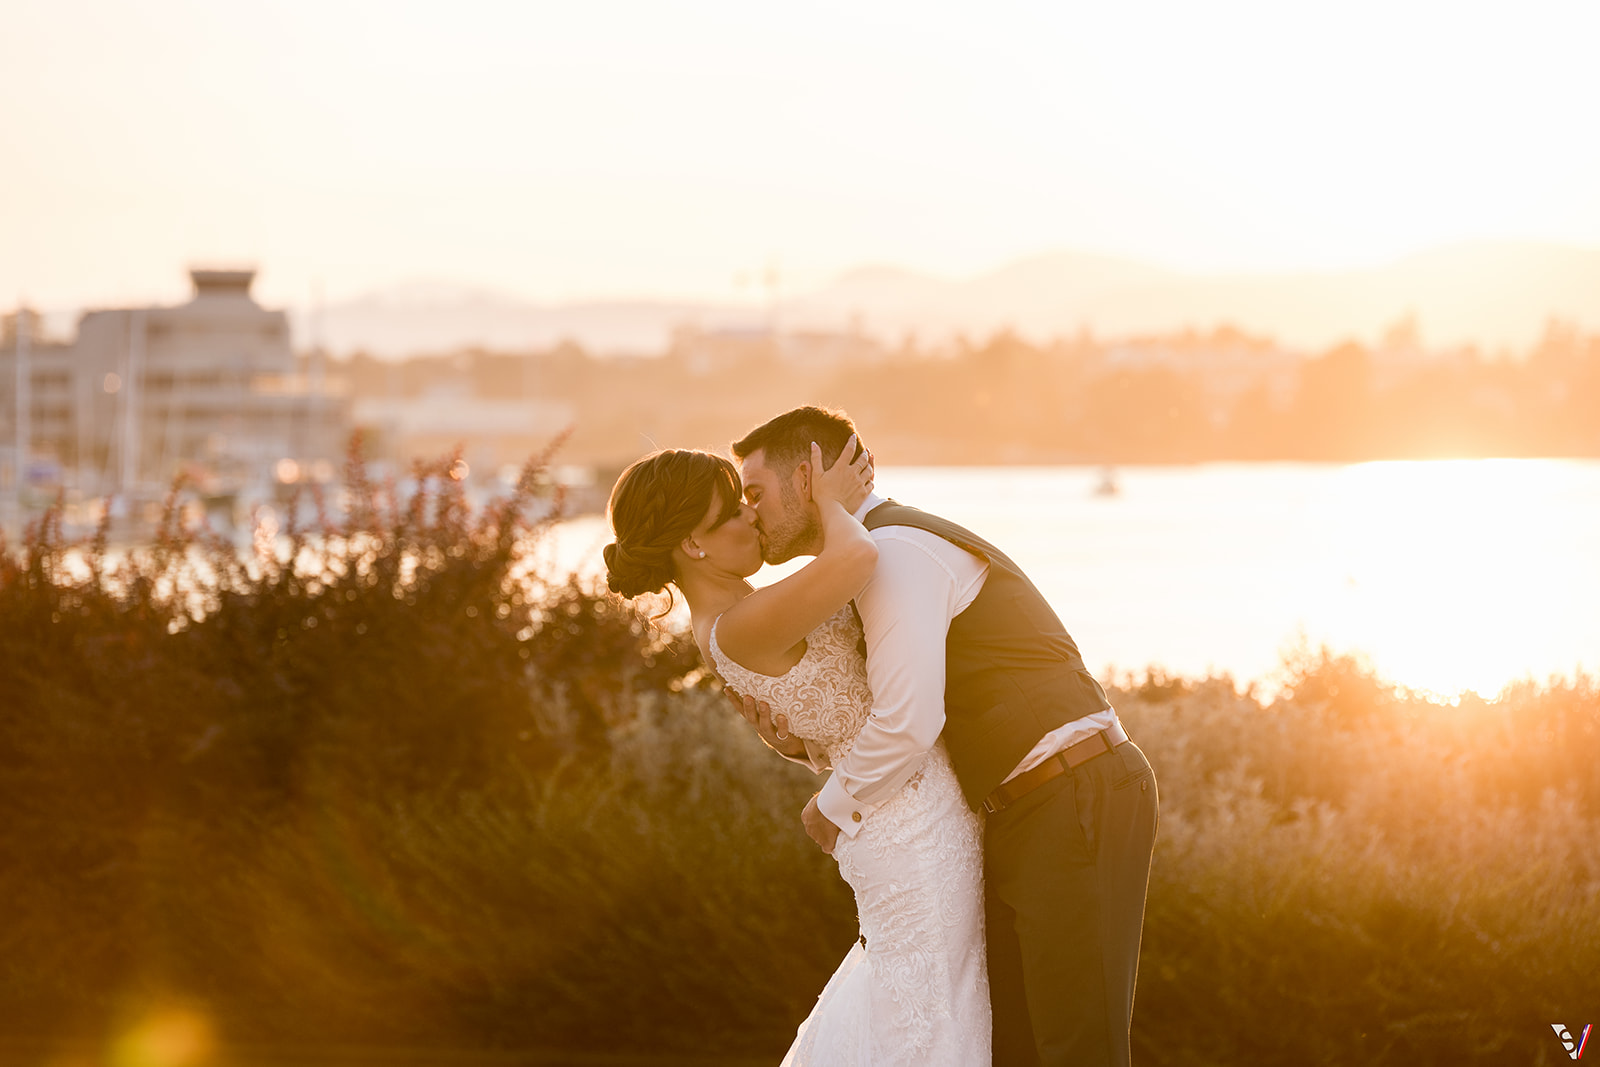 The sunset from the Laurel Point Resort terrace was outstanding and created a romantic moment.